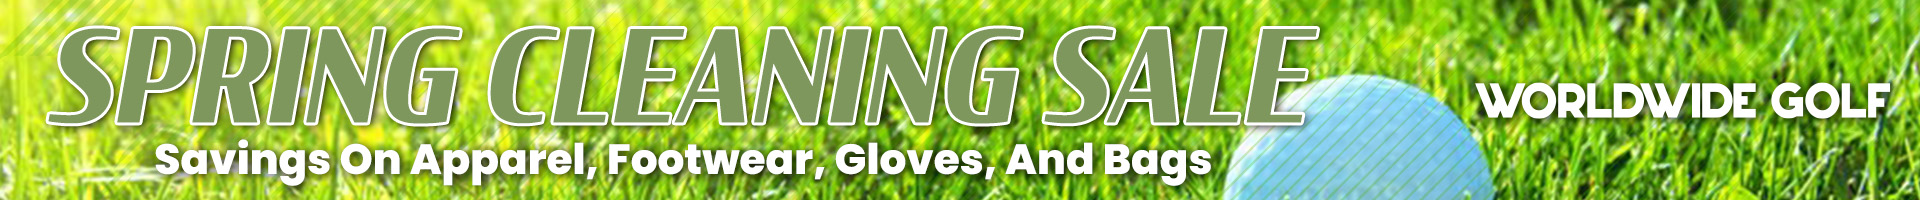 Golf Spring Cleaning Sale